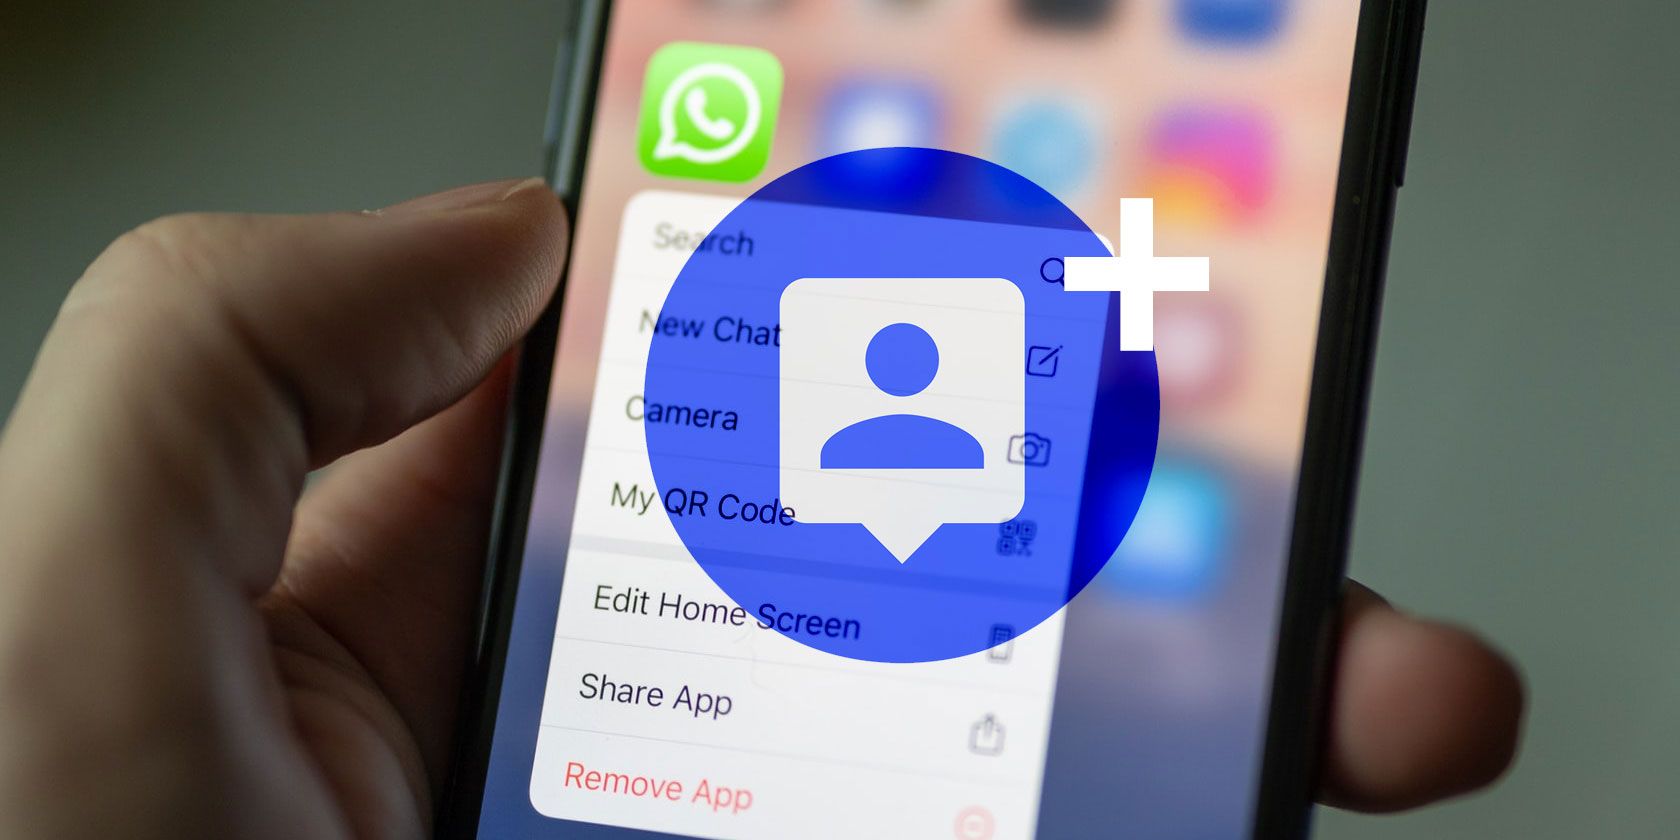 How To Add A Contact To Whatsapp